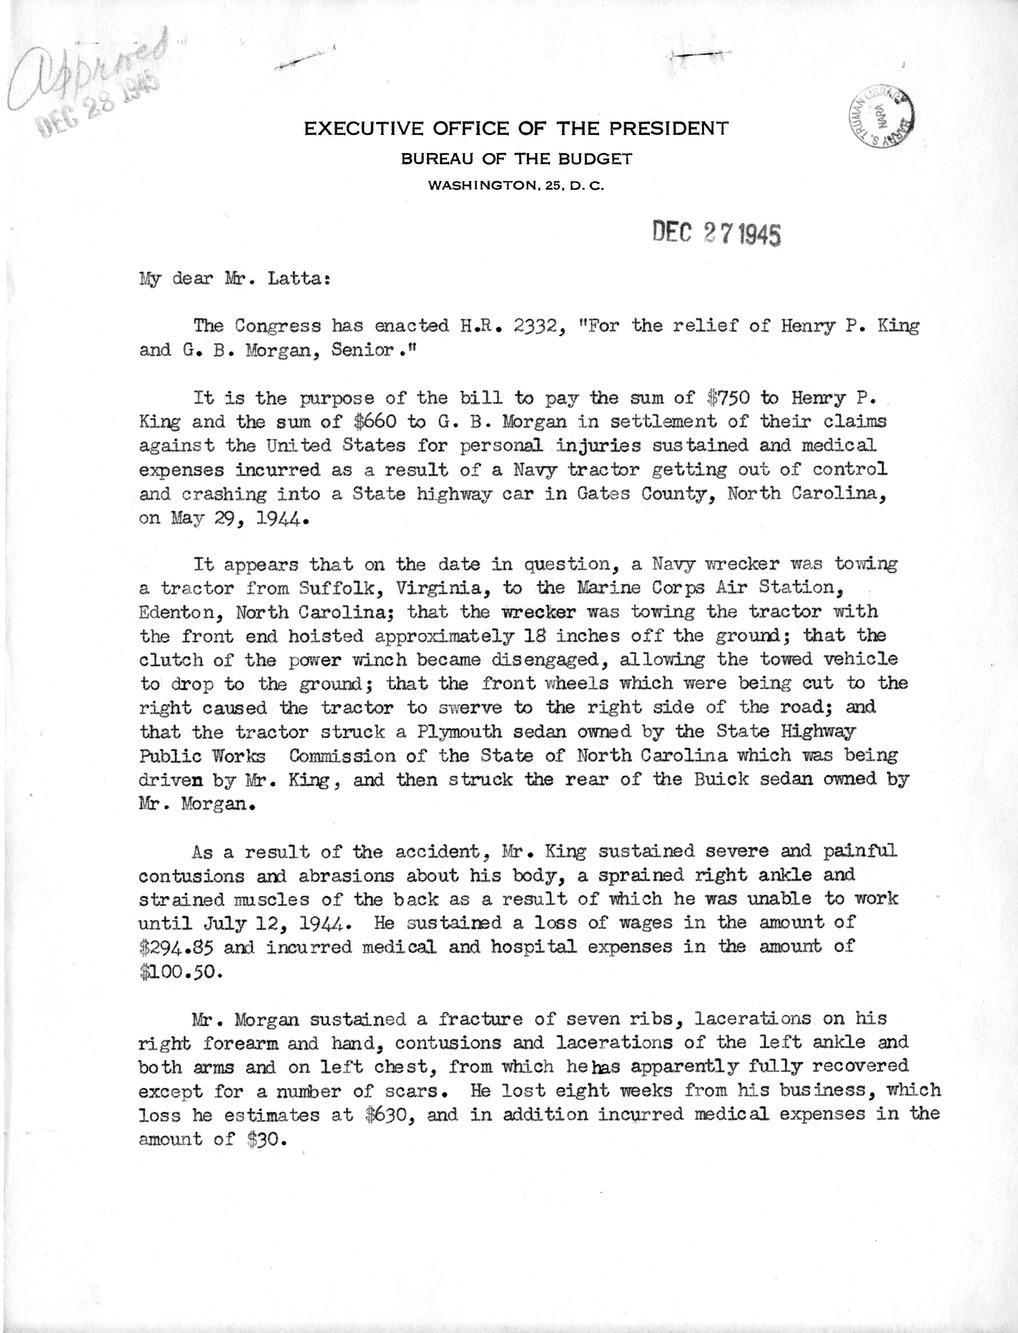 Memorandum from Frederick J. Bailey to M. C. Latta, H.R. 2332, For the Relief of Henry P. King and G.B. Morgan, Senior, with Attachments